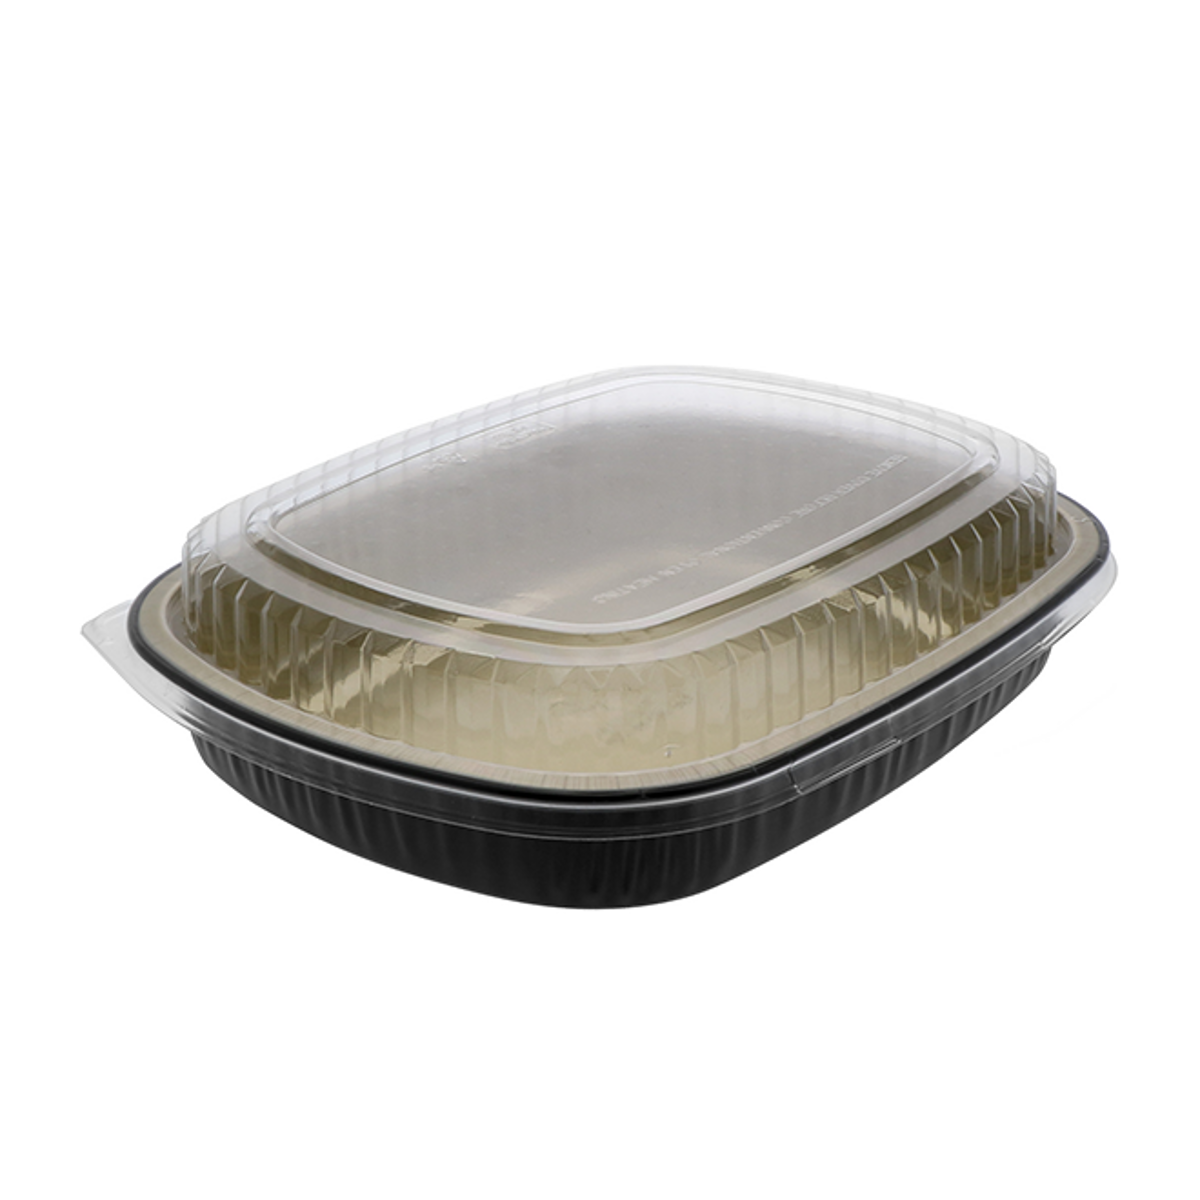 11.25 X 8.88 X 2.16 Aluminum Carry-Out Container, Black And Gold Base  With Clear Dome, 50 Ct.